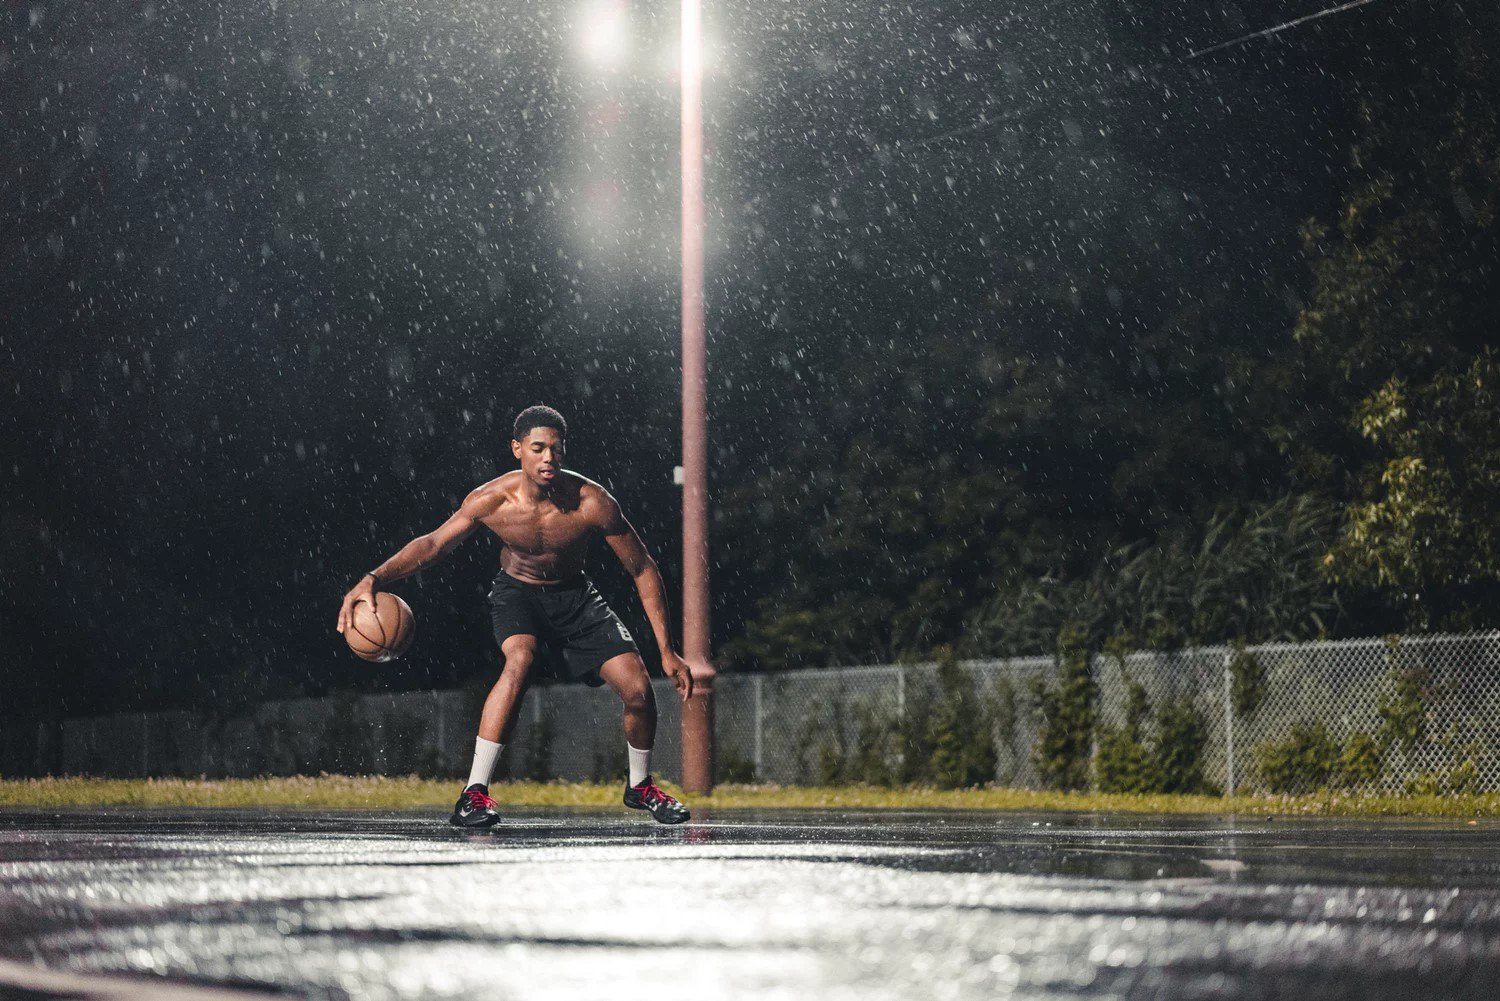 A man playing basketball in the rain.